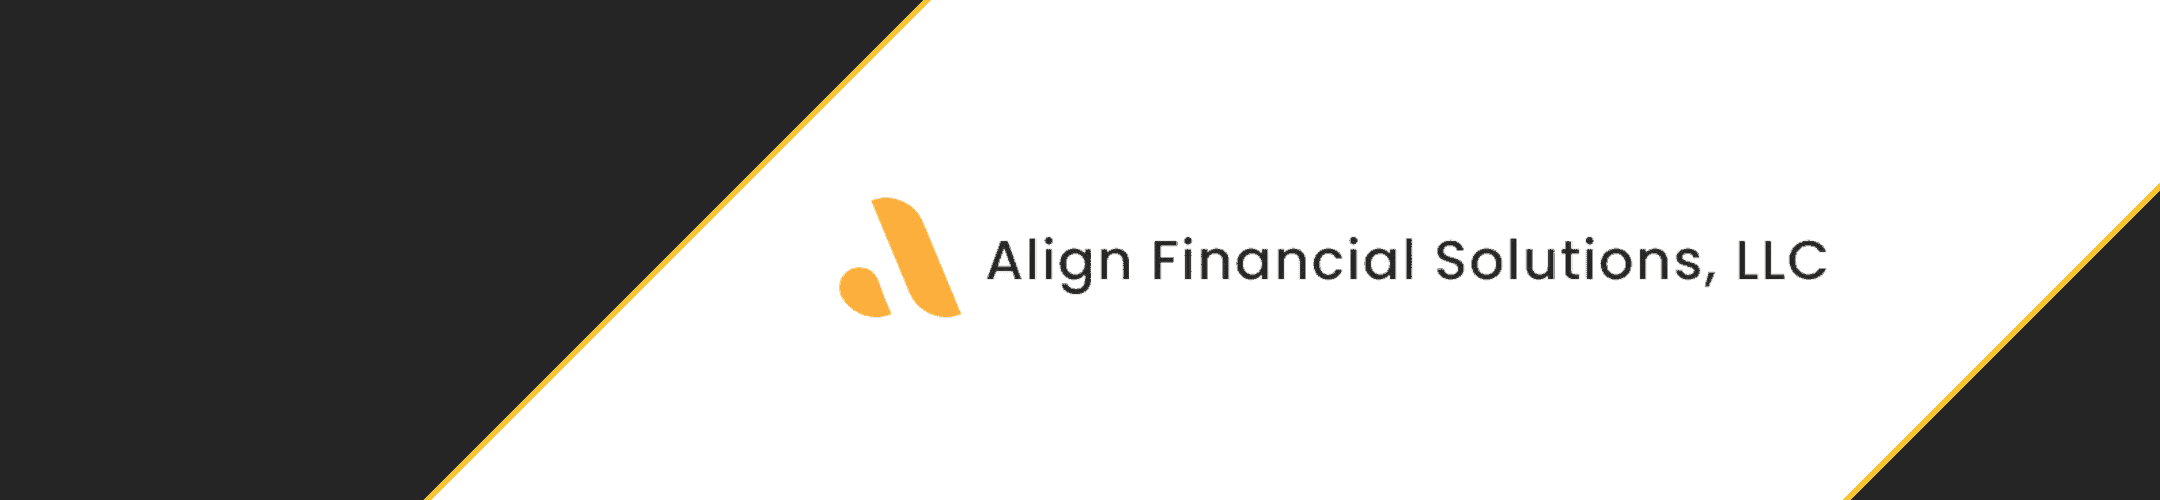 Professional business banner for align financial solutions, llc featuring a sleek black and white diagonal design with the company's logo in a prominent position.